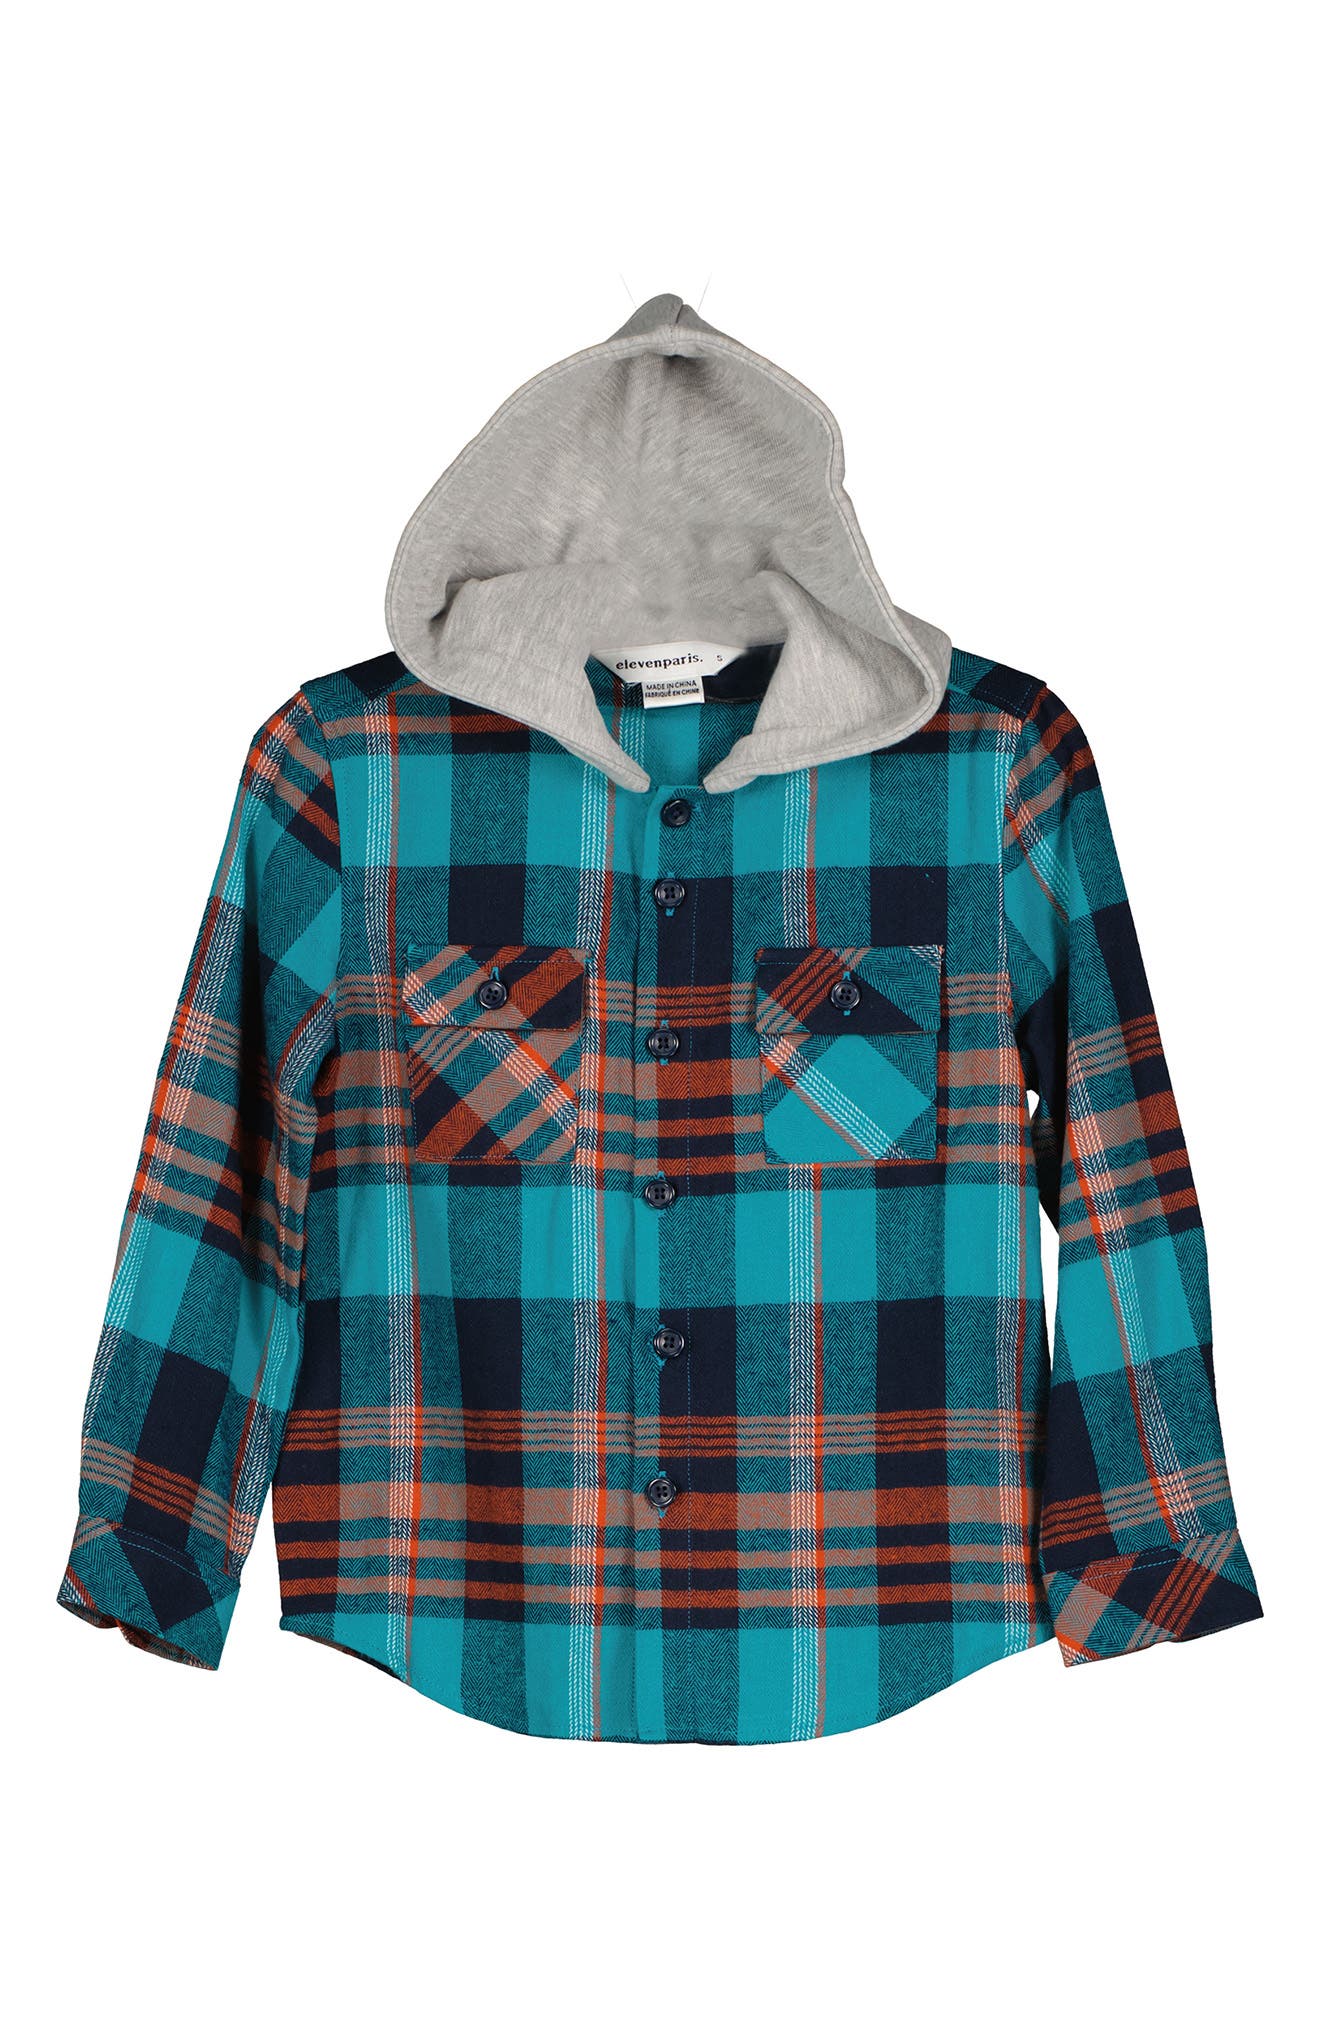 Toddler Baby Boy Hoodies Long Sleeve Button Down Plaid Hooded Shirt Coat Jacket With Pocket Outwear 